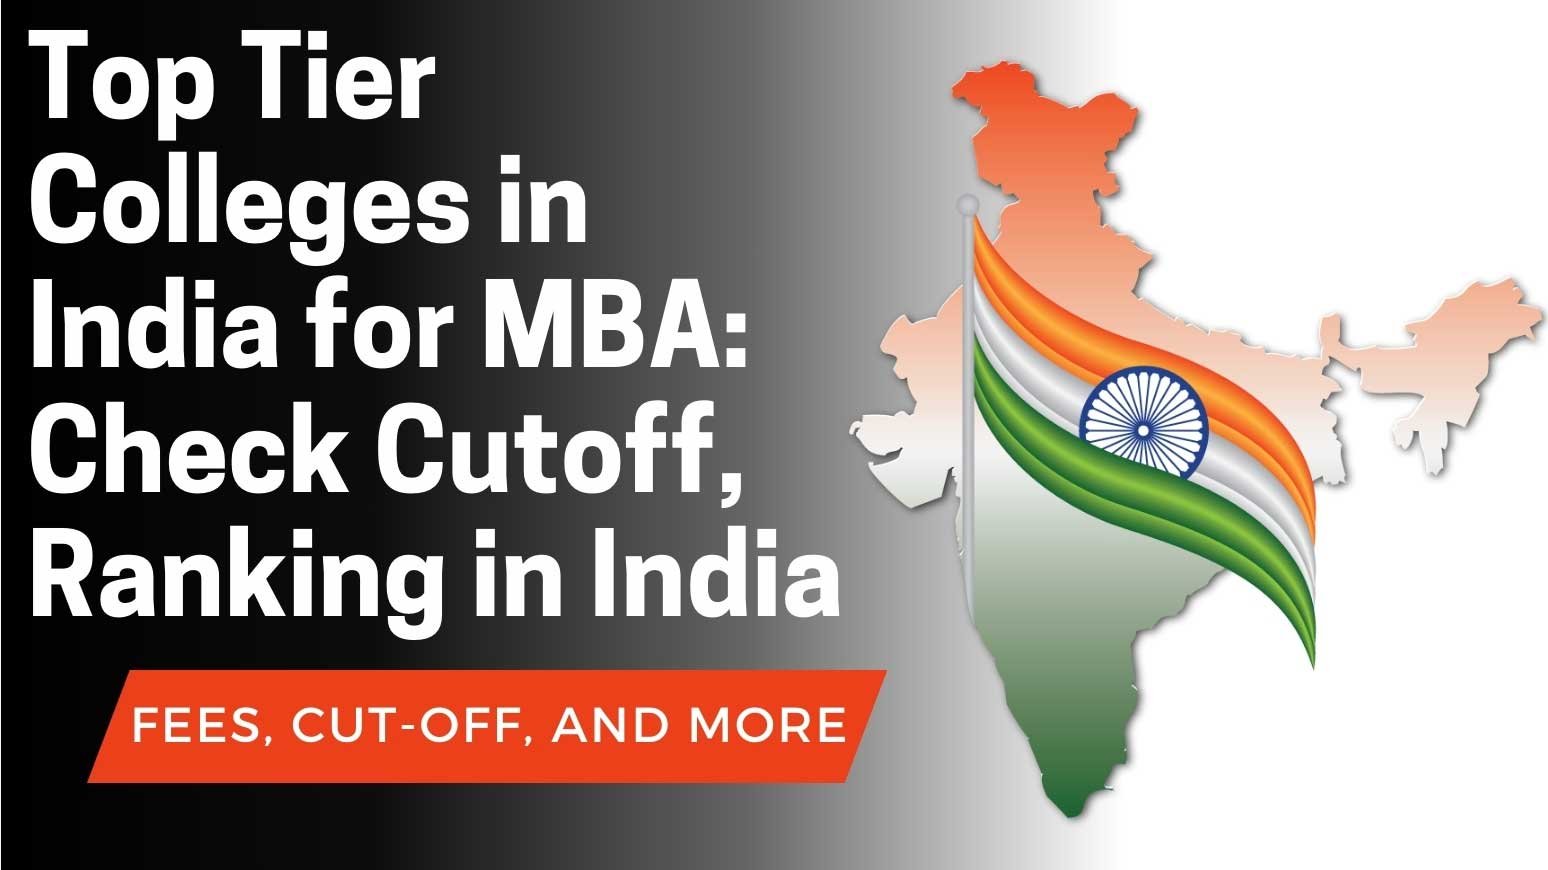 Top Tier Colleges in India for MBA Check Cutoff, Ranking in India